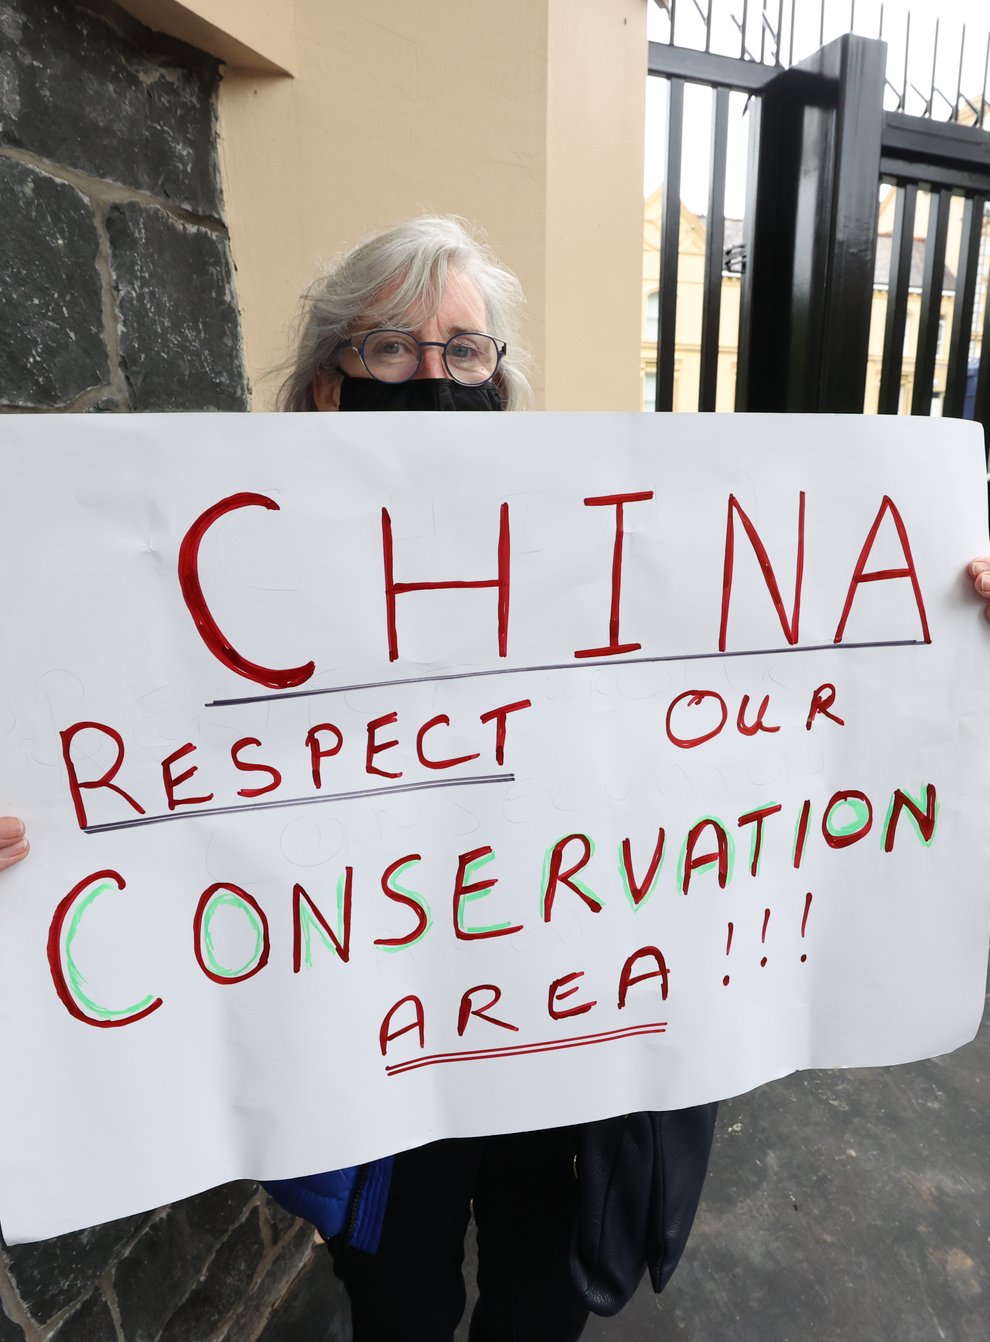 A resident protests outside the Chinese Consulate, Belfast